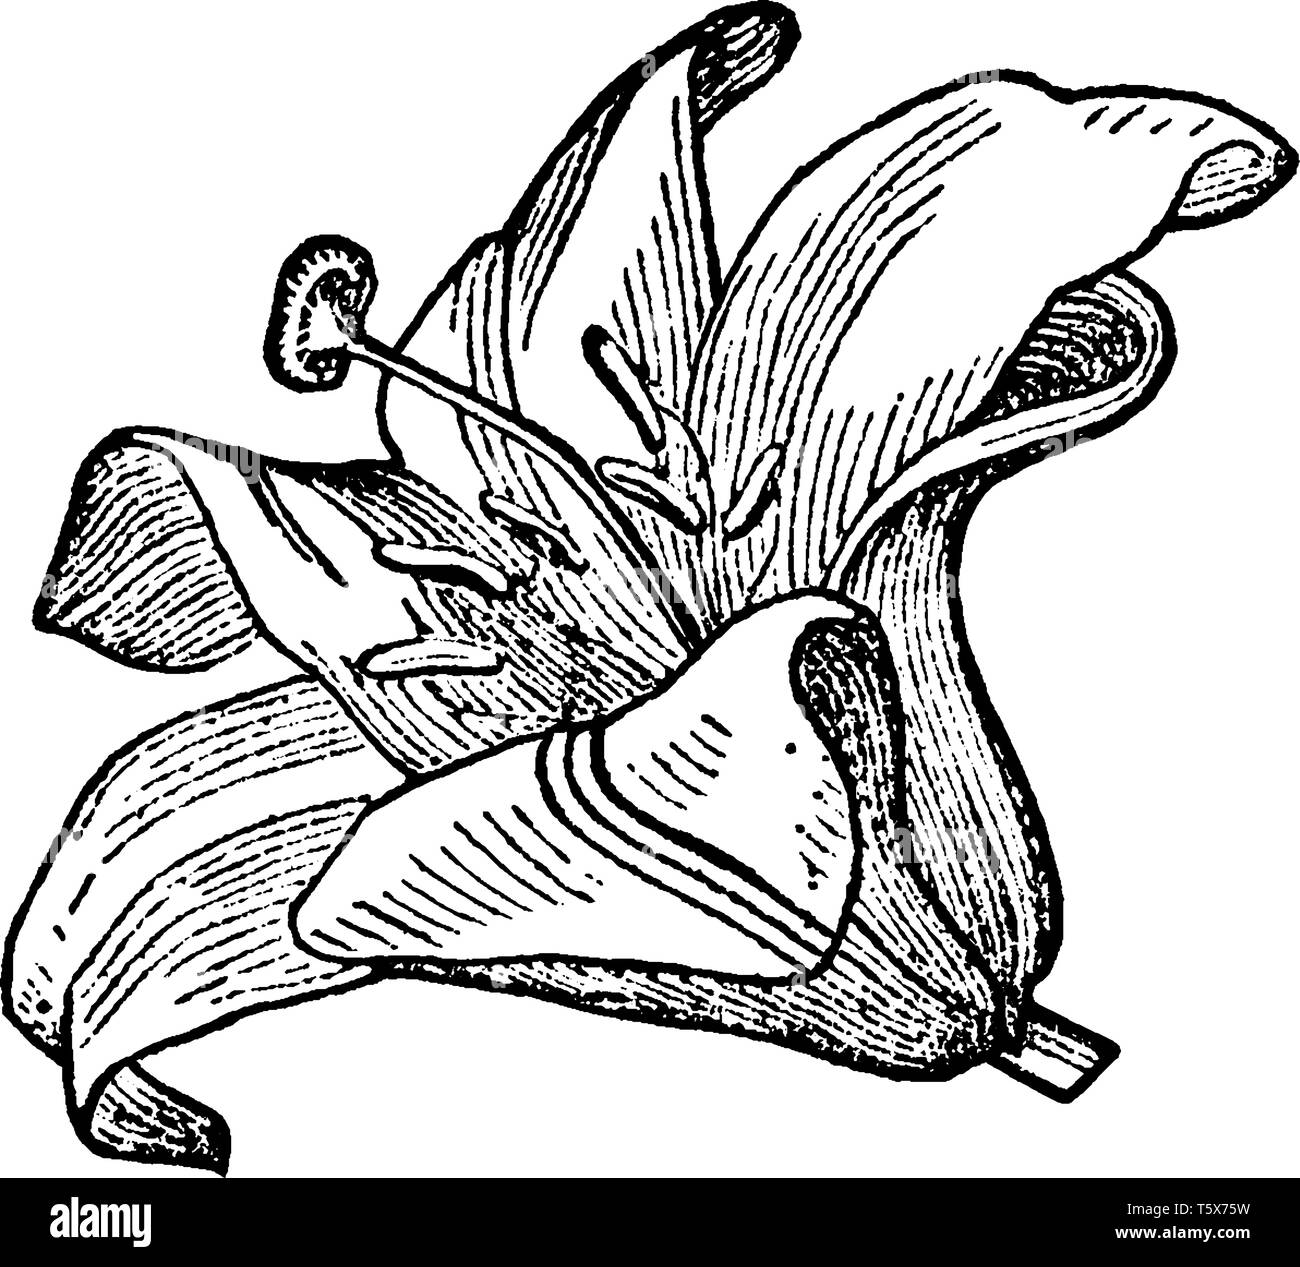 An image of a Liliaceous Corolla flower which is the inner circle of the parts of the flowers, composed of petals, vintage line drawing or engraving i Stock Vector